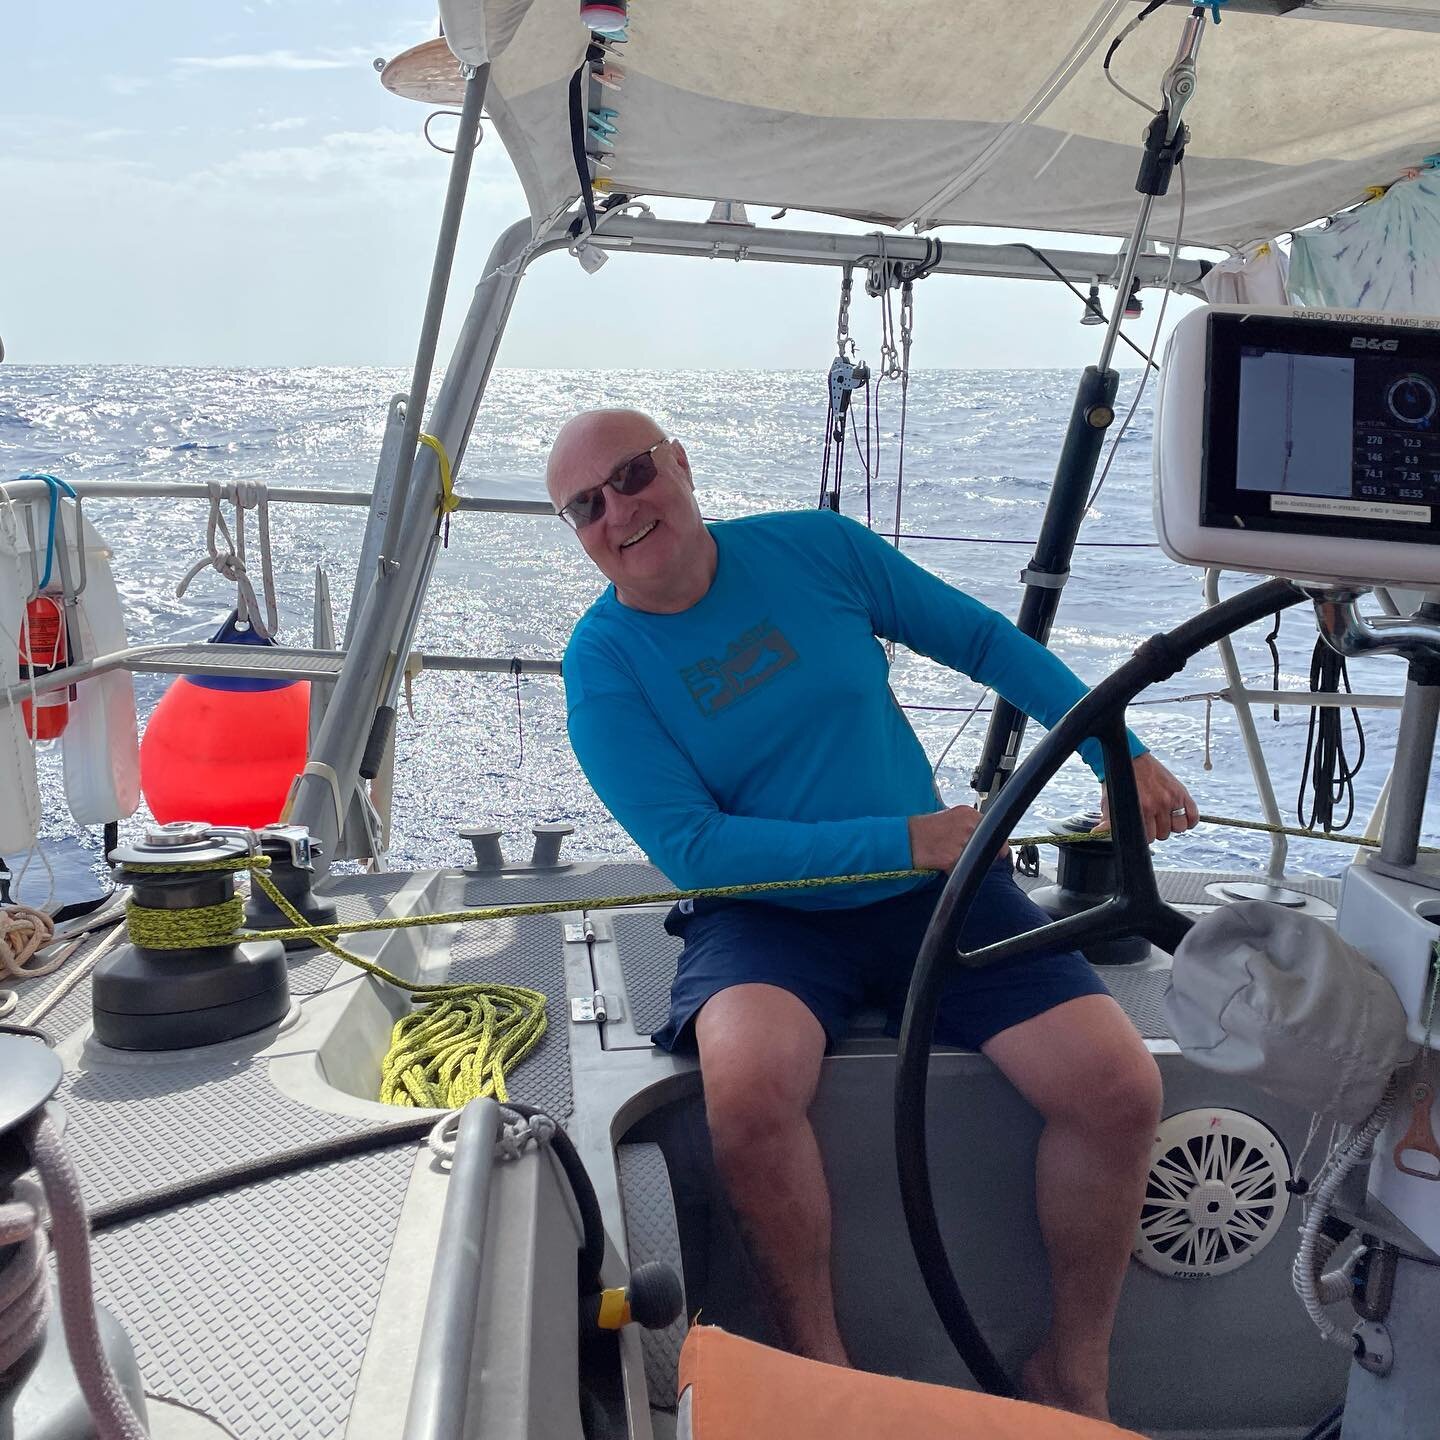 Sailing across the Atlantic has been a family adventure! Here is Papa Bert trimming the spinnaker on passage from Bermuda to Horta, Azores. Since we had four adult sailors on board we could be more aggressive with our sail plan. It was a luxury and w